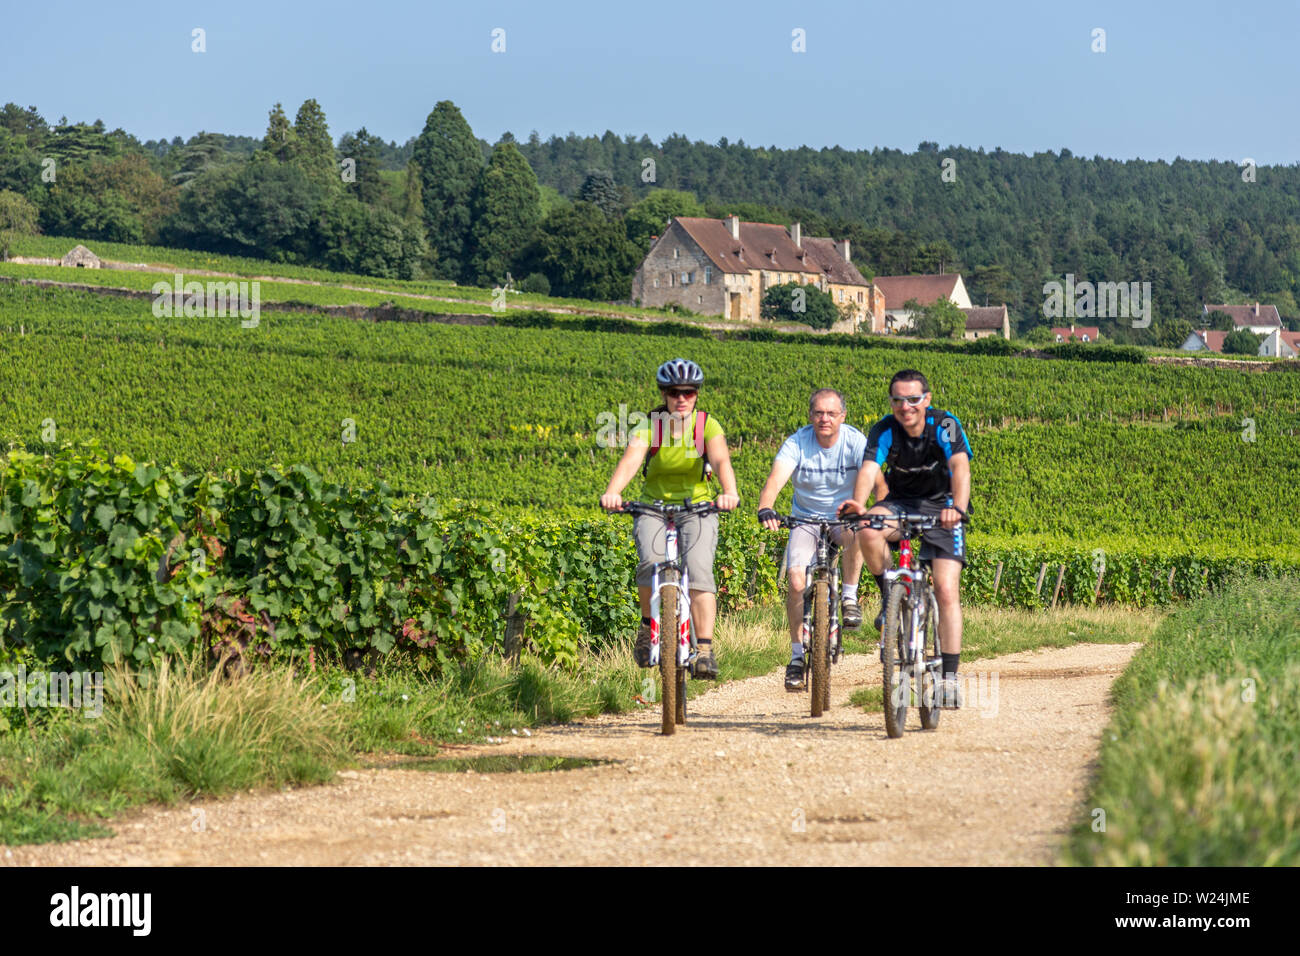 Cote D'or, Dijon, France - July 26, 2014: three people riding bicycles on a road of the Cote D'or, Burgundy, among beautiful landscape of vineyards. Stock Photo